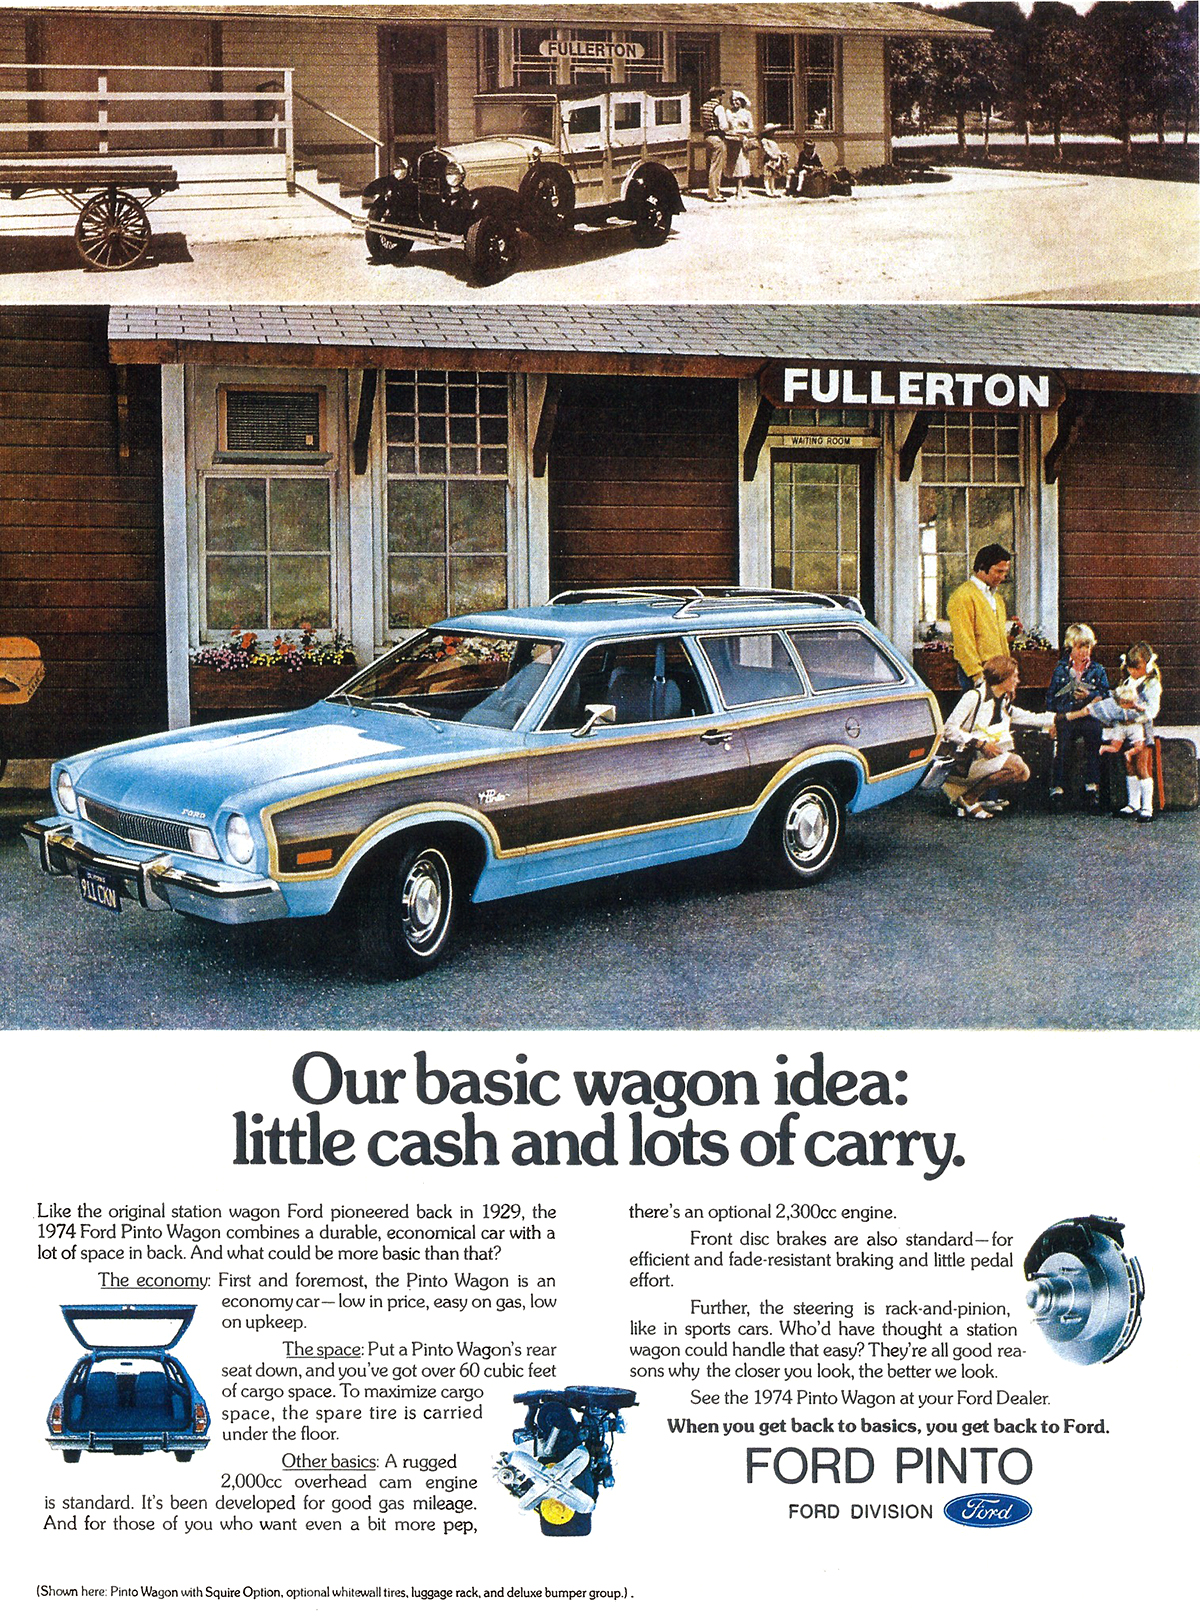 Ford Pinto Wagon with Squire Option Ad (1973–1974) - Our basic wagon idea: little cash and lots of carry